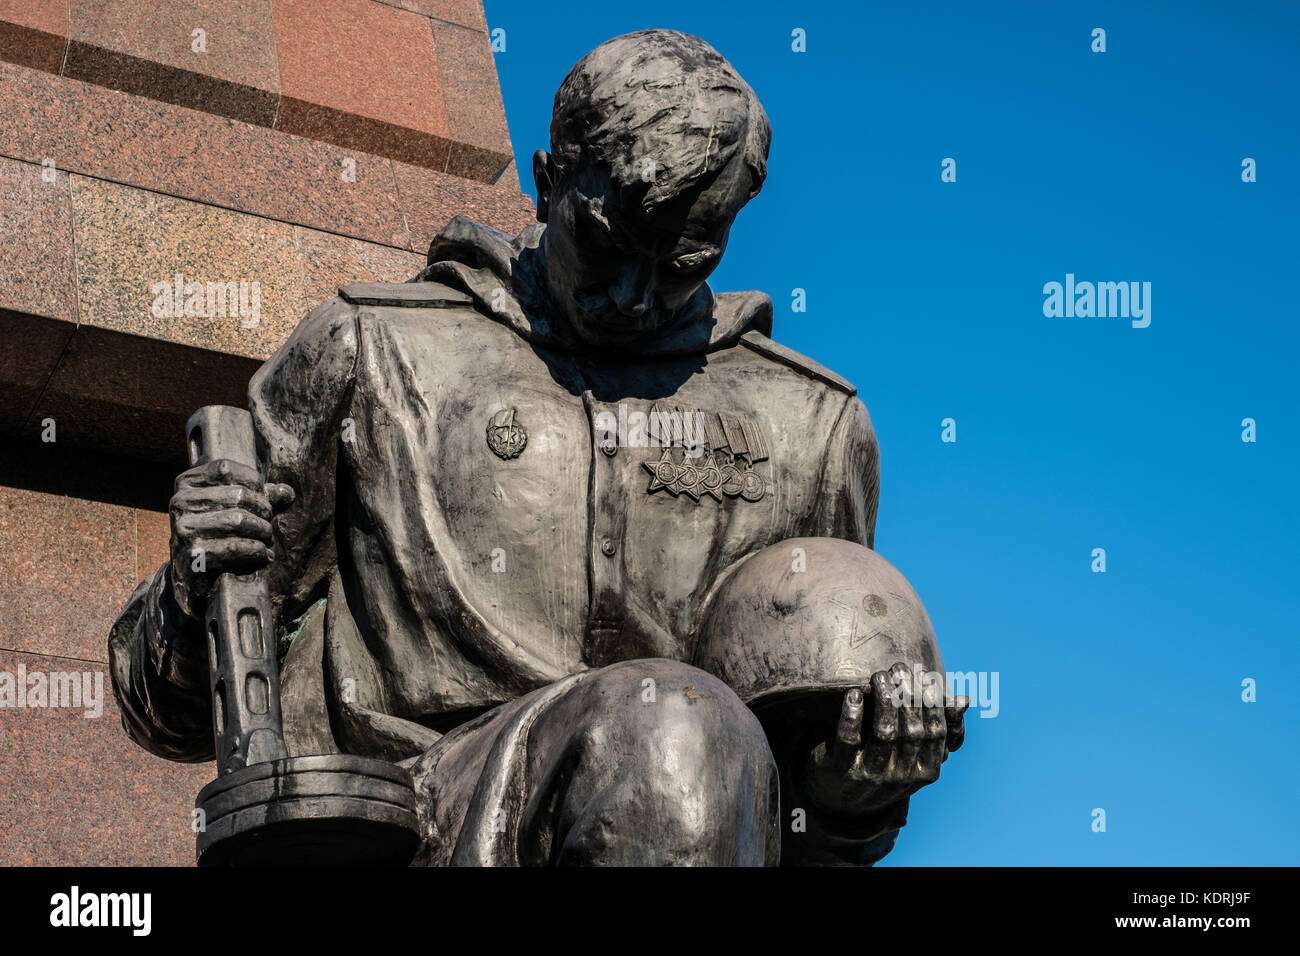 Berlin, Germany - october 2017: Statue of a russian soldier at the  Soviet War Memorial and military cemetery in Berlin's Treptower Park Stock Photo